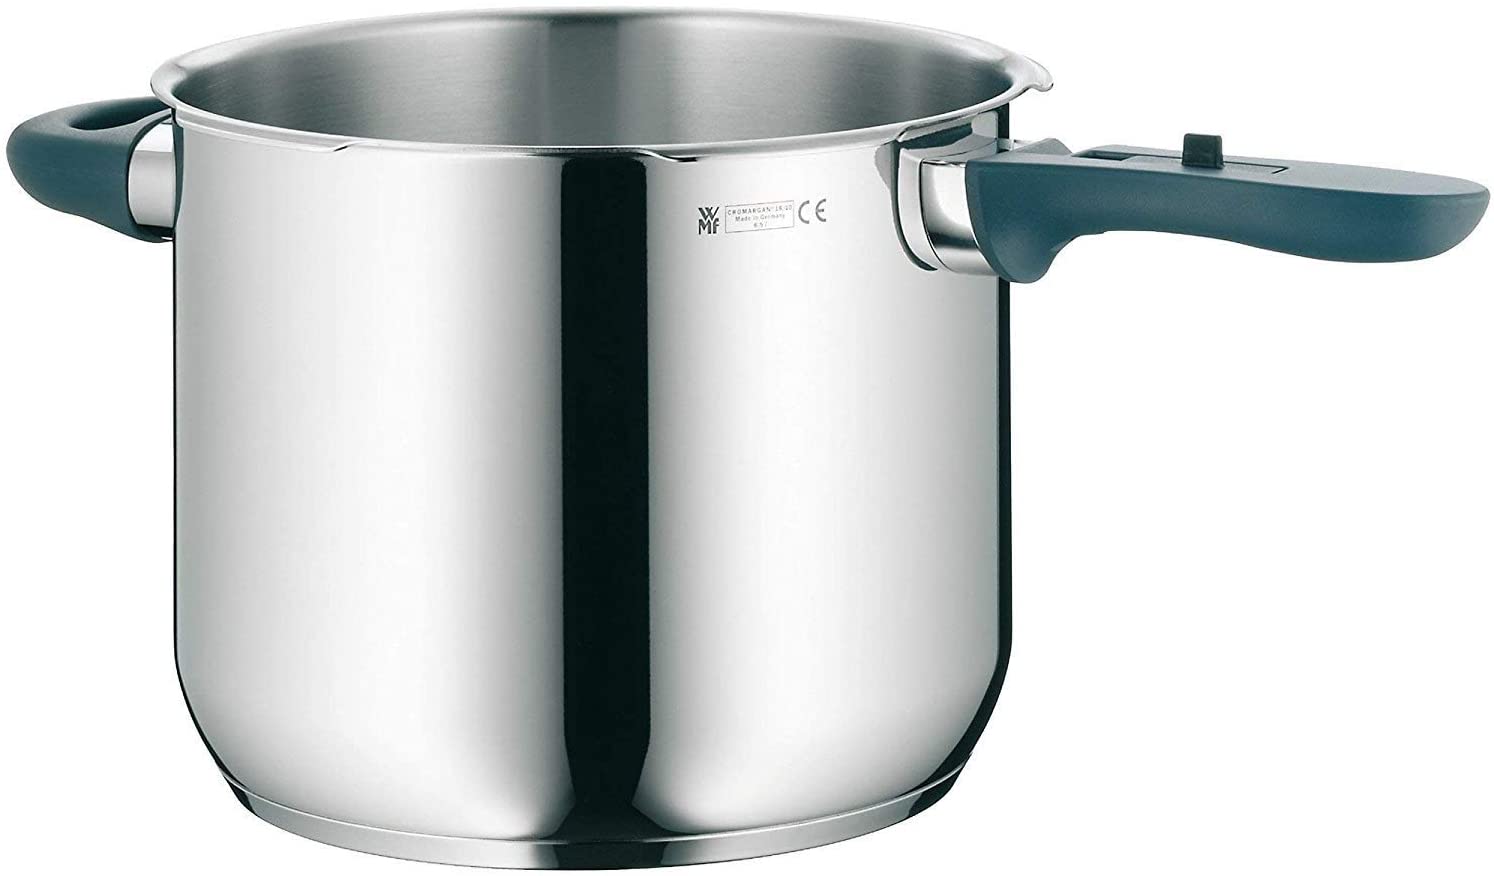 WMF Perfect Plus Pressure Cooker Base 6.5L without Lid Ø 22 cm Inside Scale Cromargan® Stainless Steel Suitable for Induction Hobs